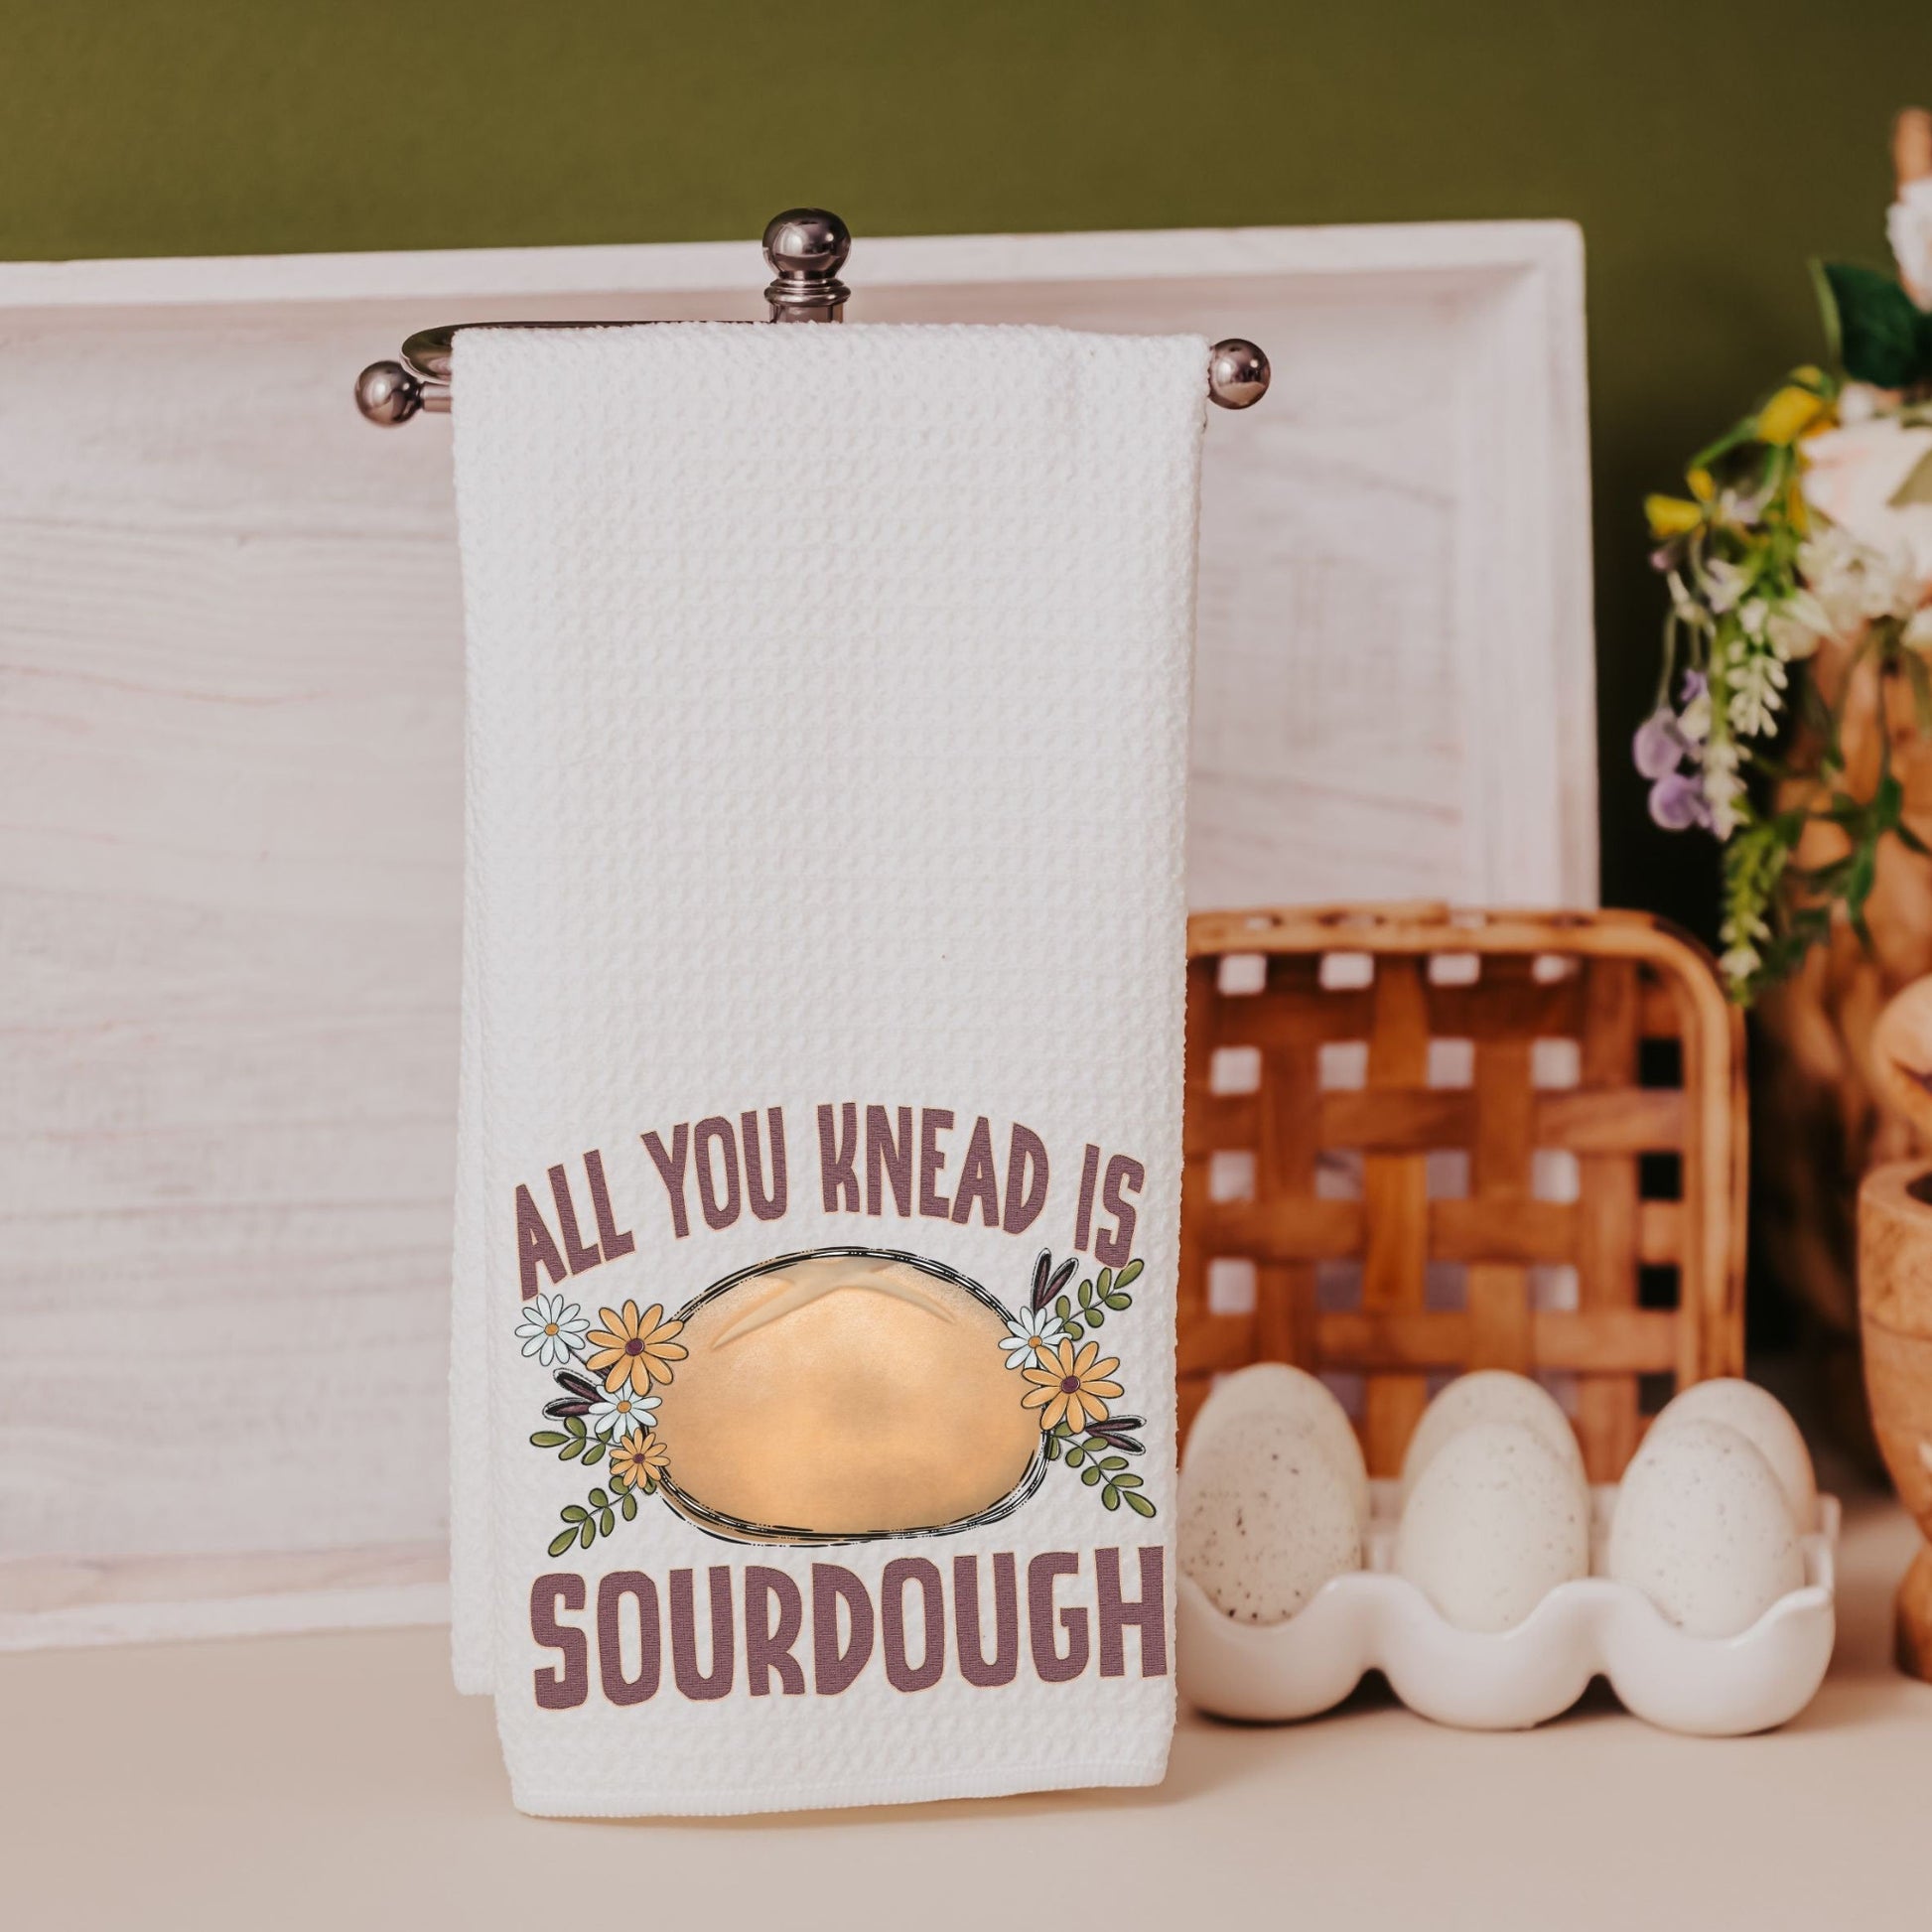 All you knead is sourdough funny kitchen towels